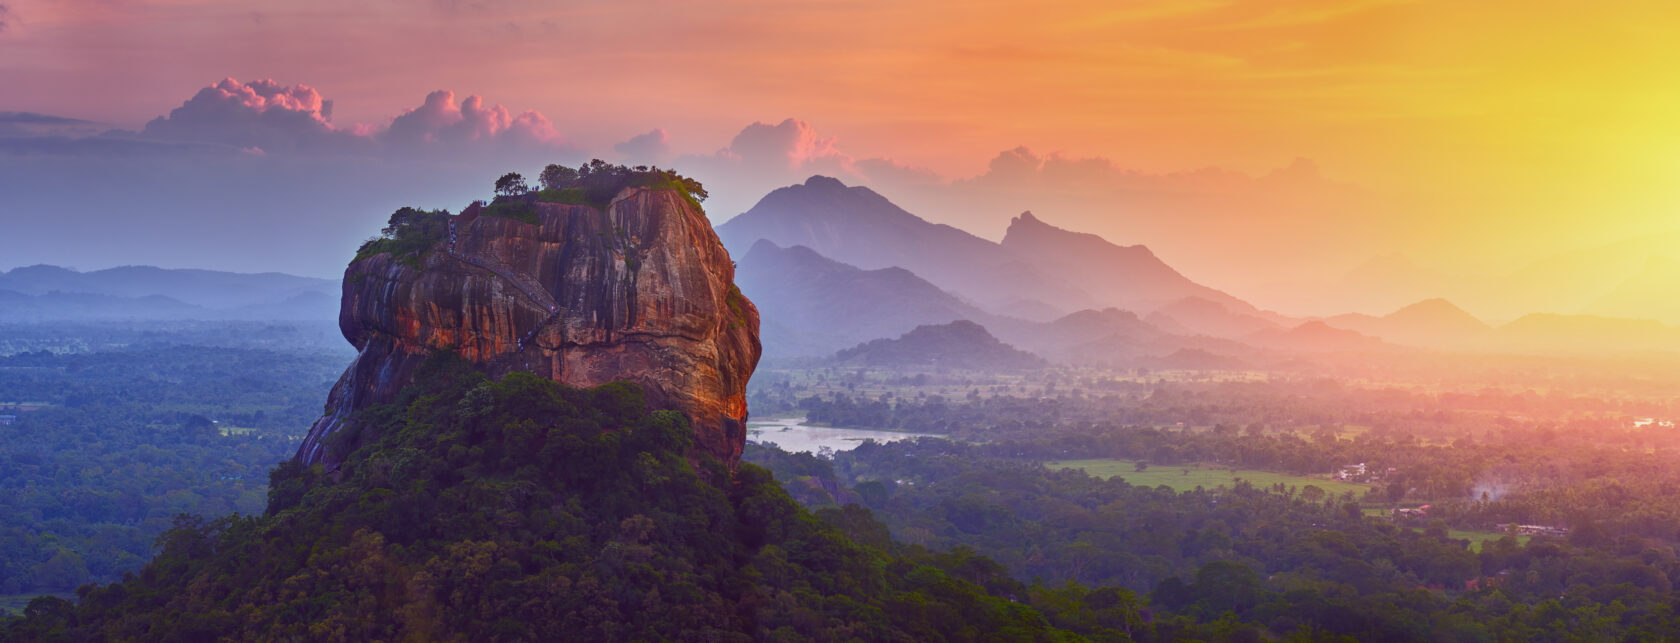 Panoramic view of the famous ancient stone fortress Sigiriya (Lion Rock) on the island of Sri Lanka, which is a UNESCO World Heritage Site.